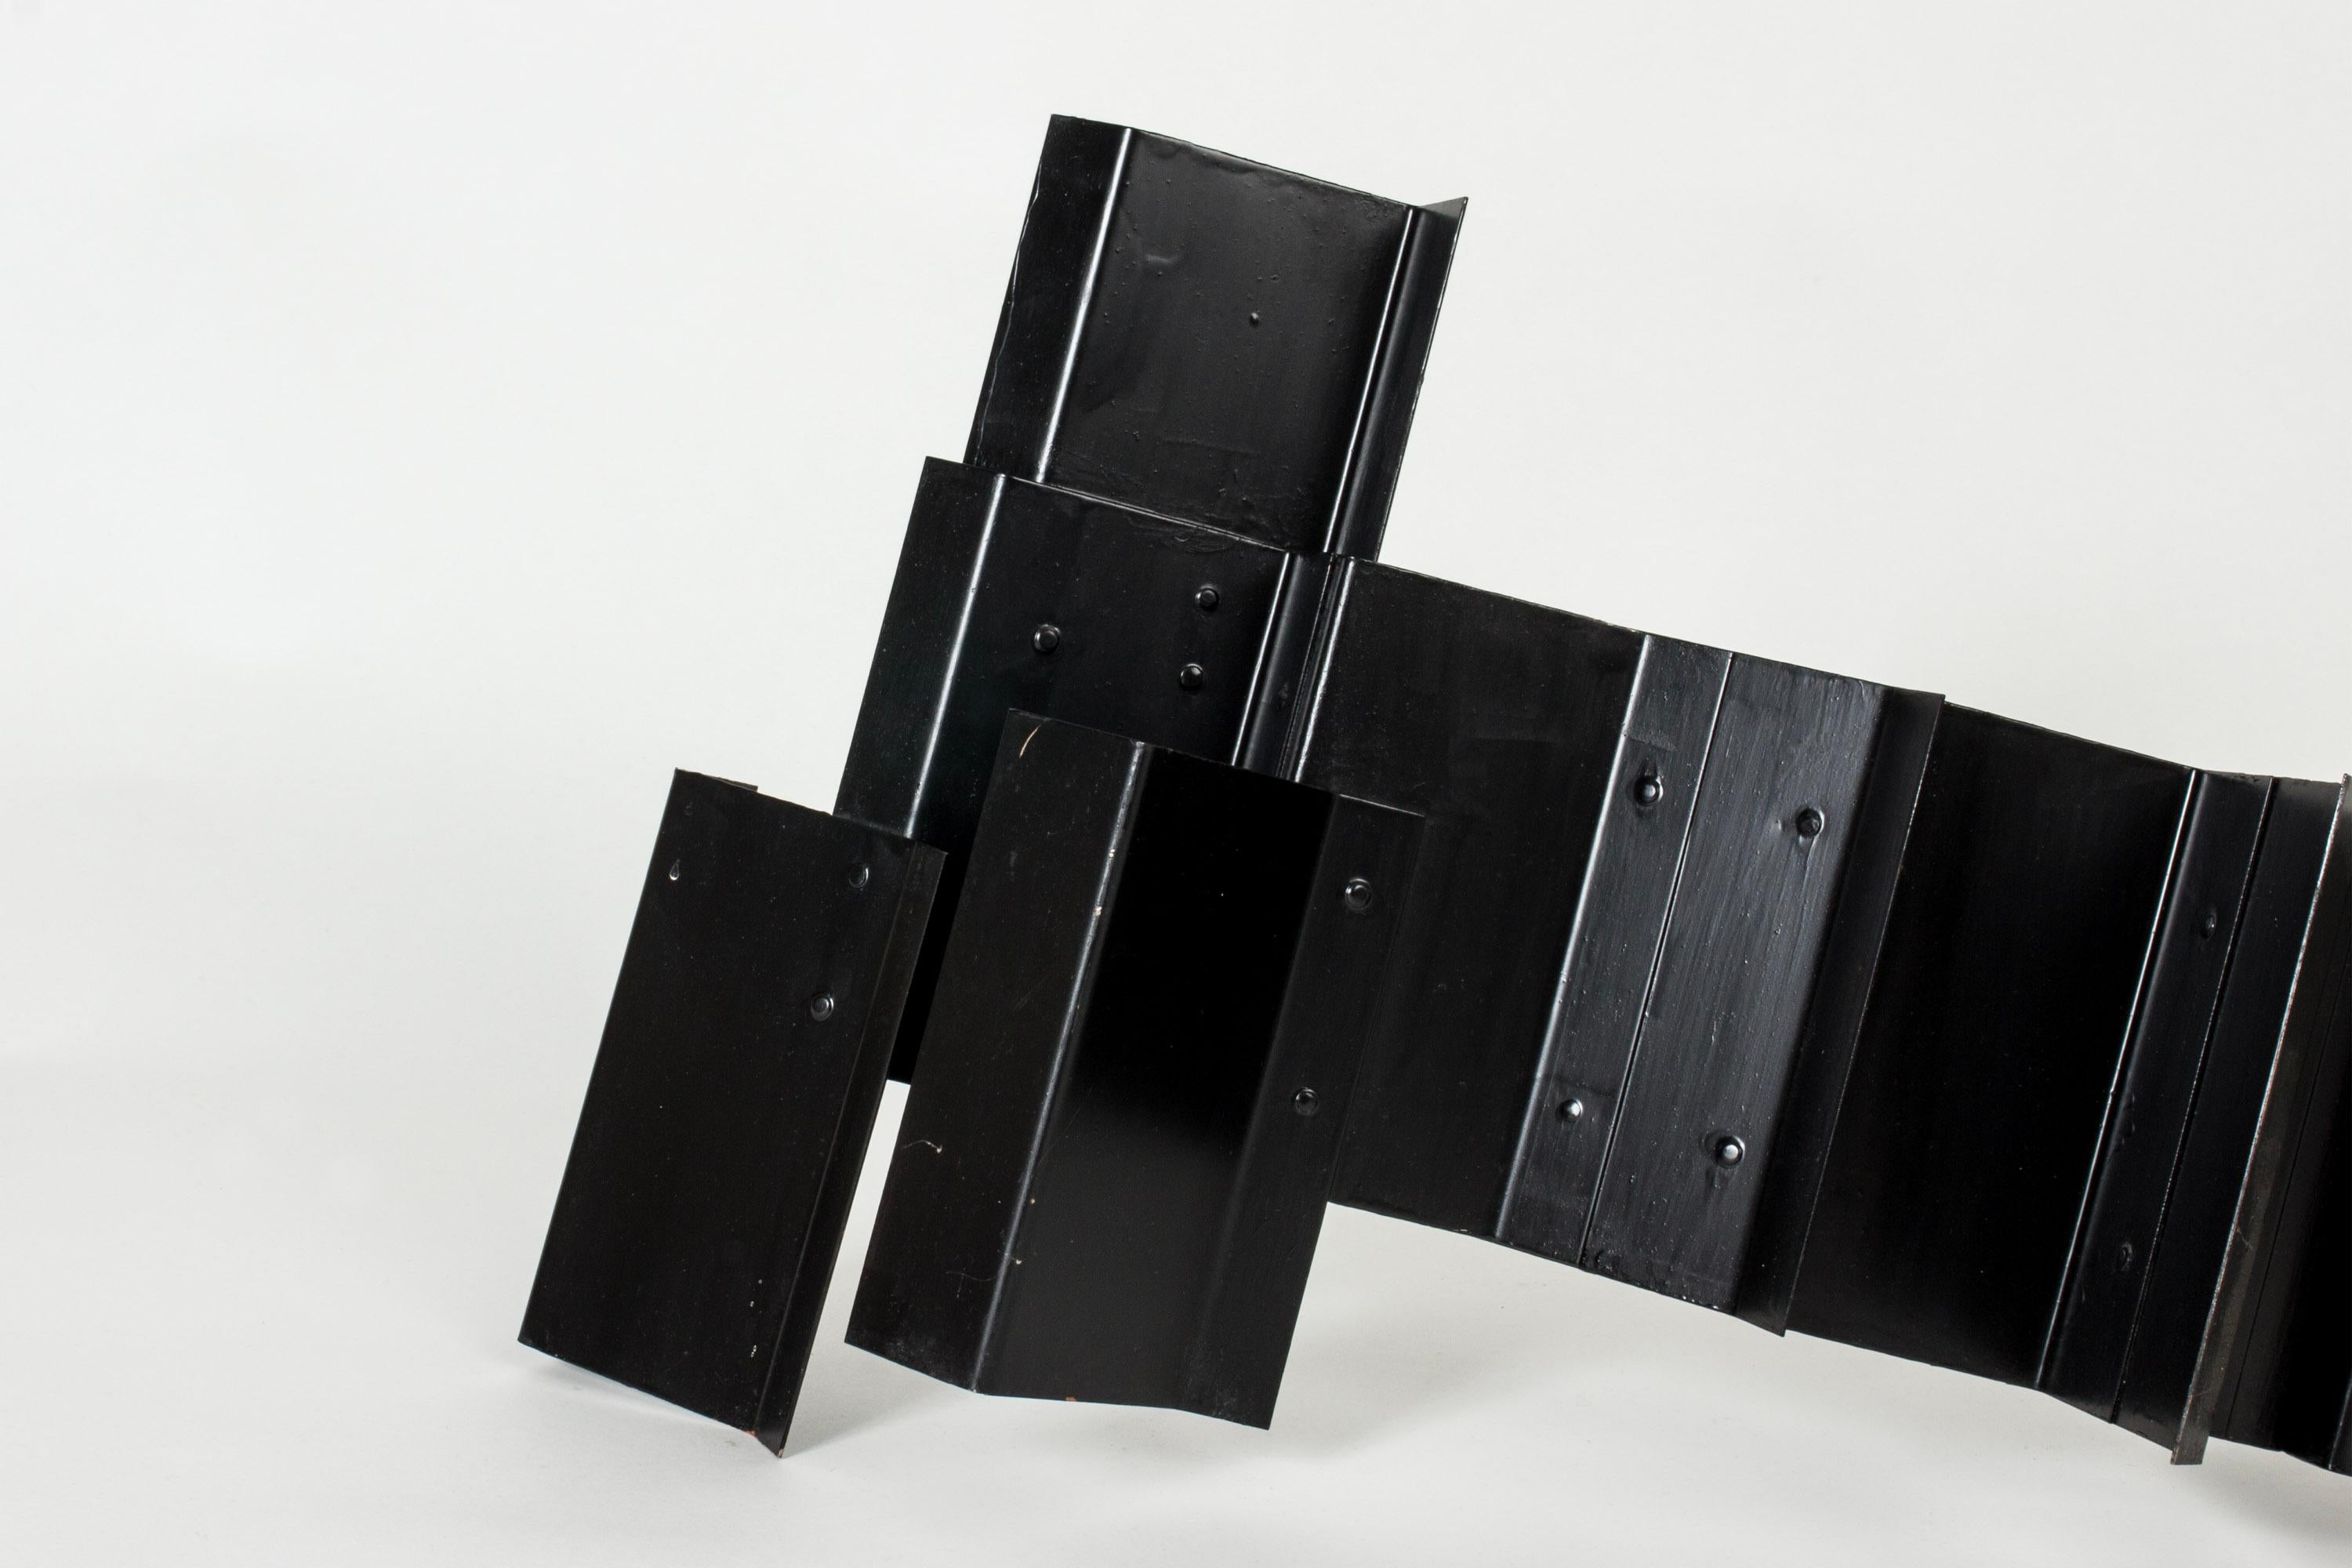 Striking sculpture by Lars Erik Falk, made from black lacquered metal. Interesting angles, different perspectives from different angles. 

Lars Erik Falk (1922-1918) was one of Sweden’s foremost constructivists. He was a painter and sculptor,